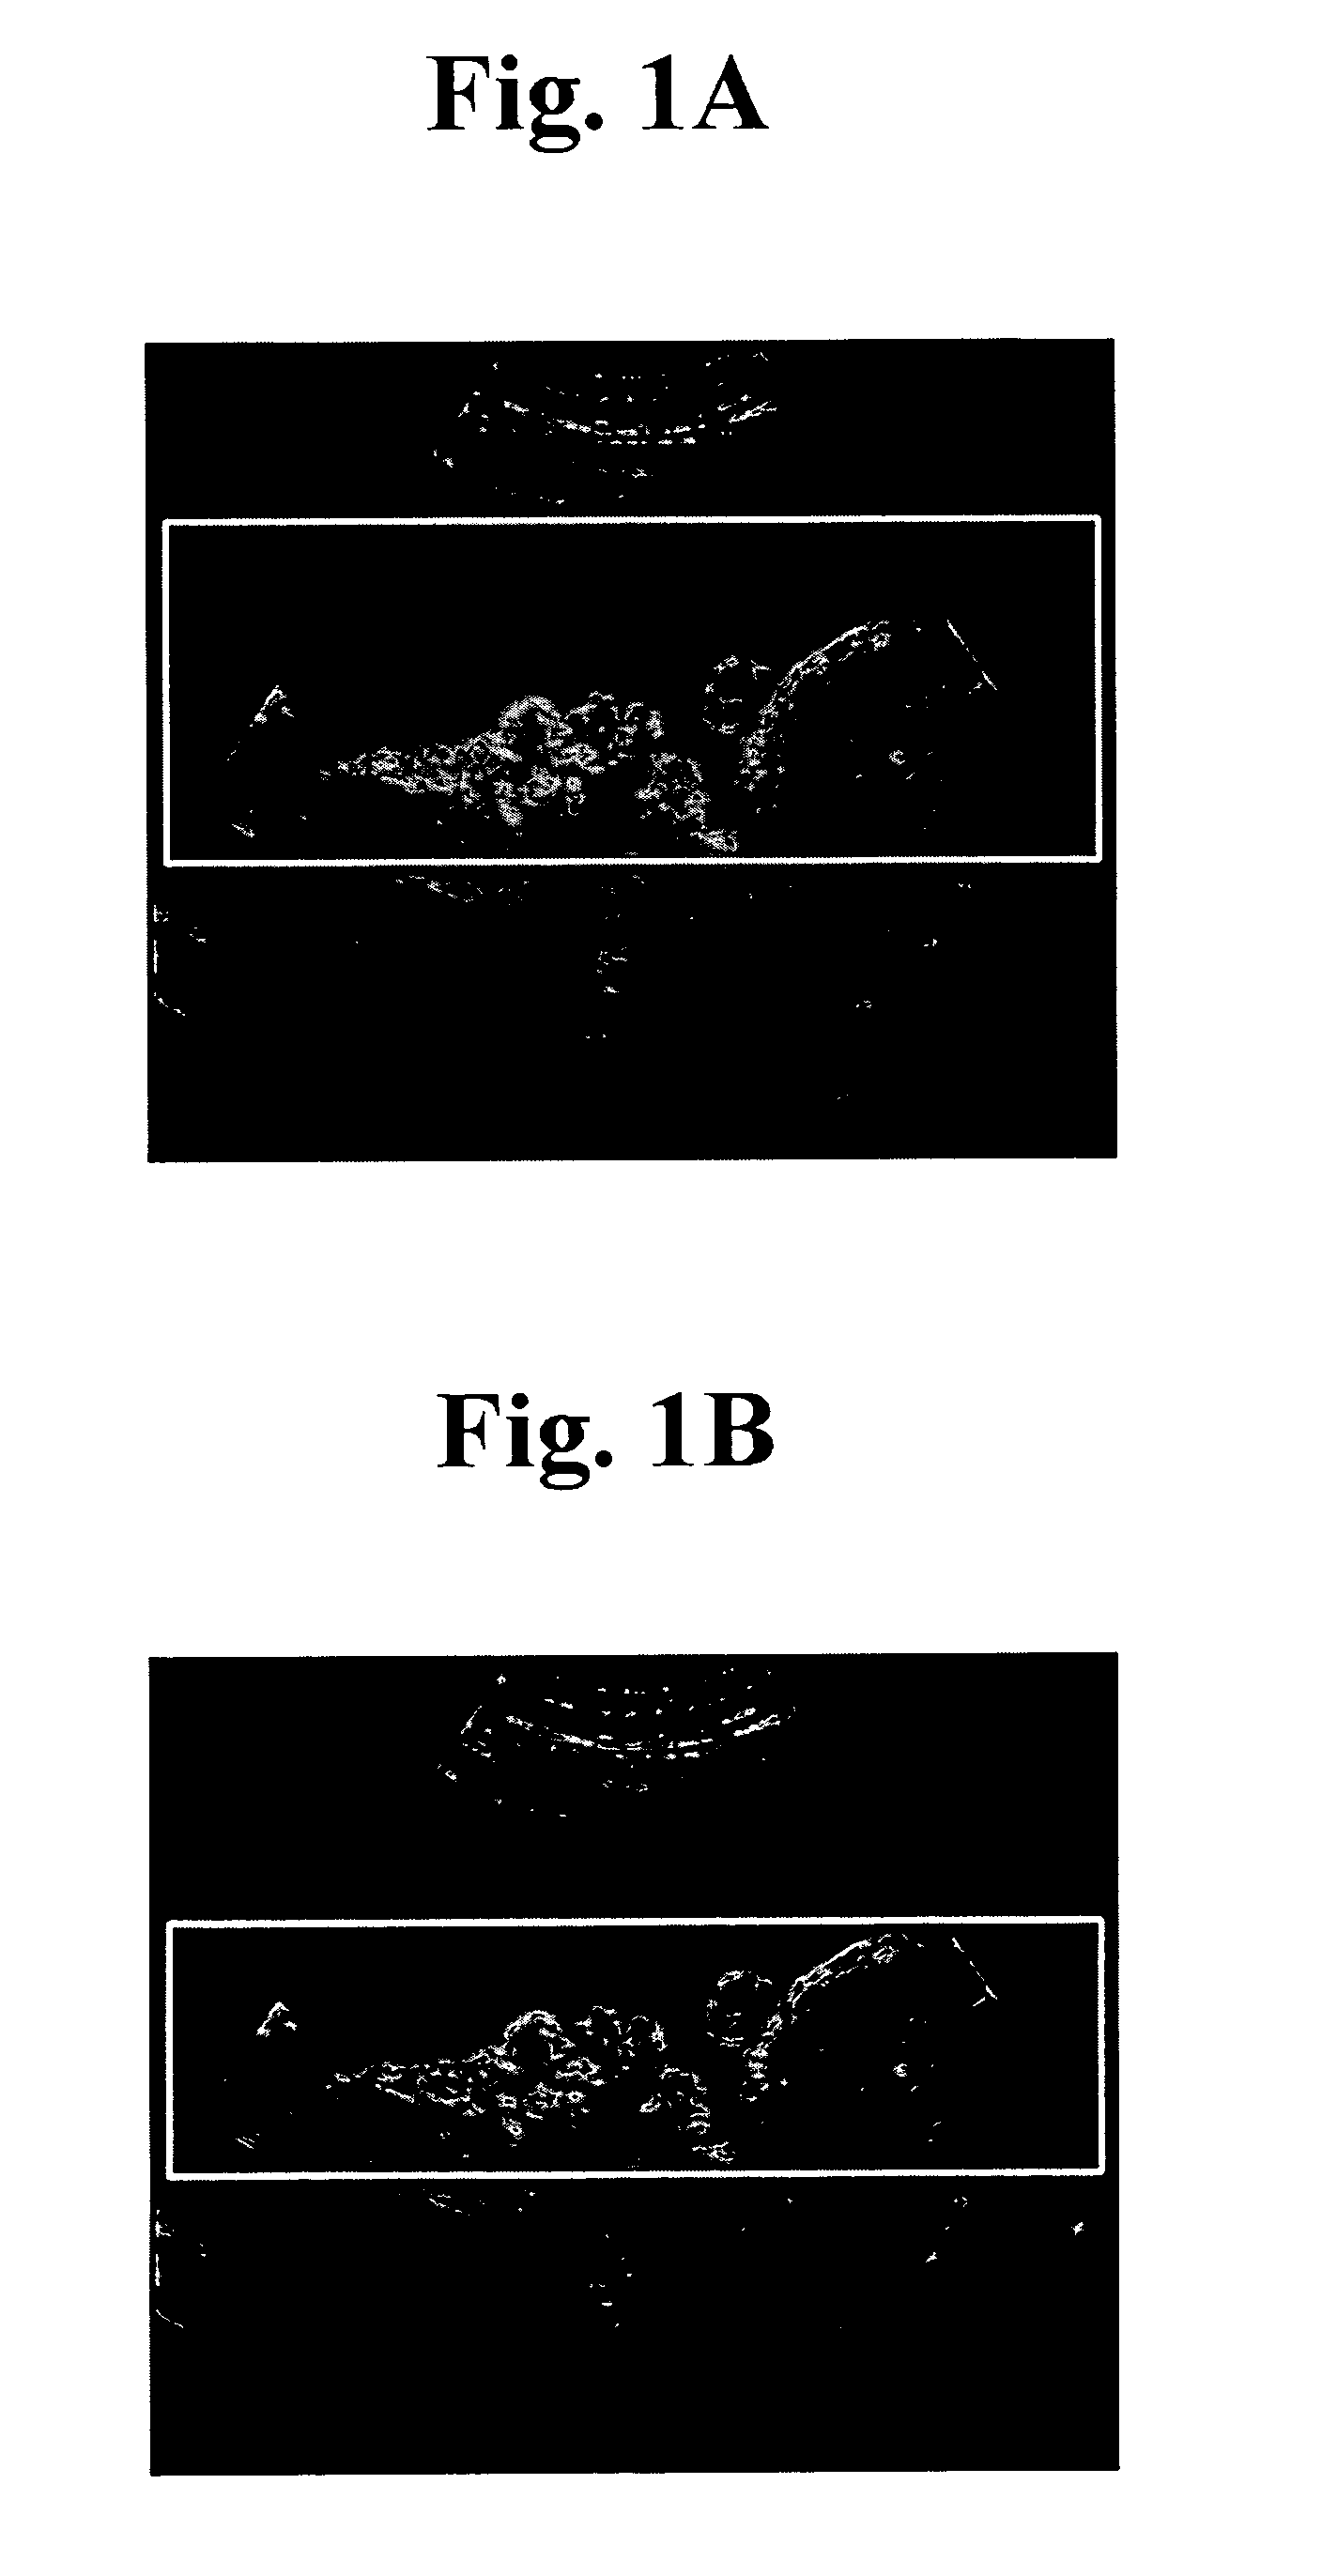 Apparatus and method for forming 3D ultrasound image